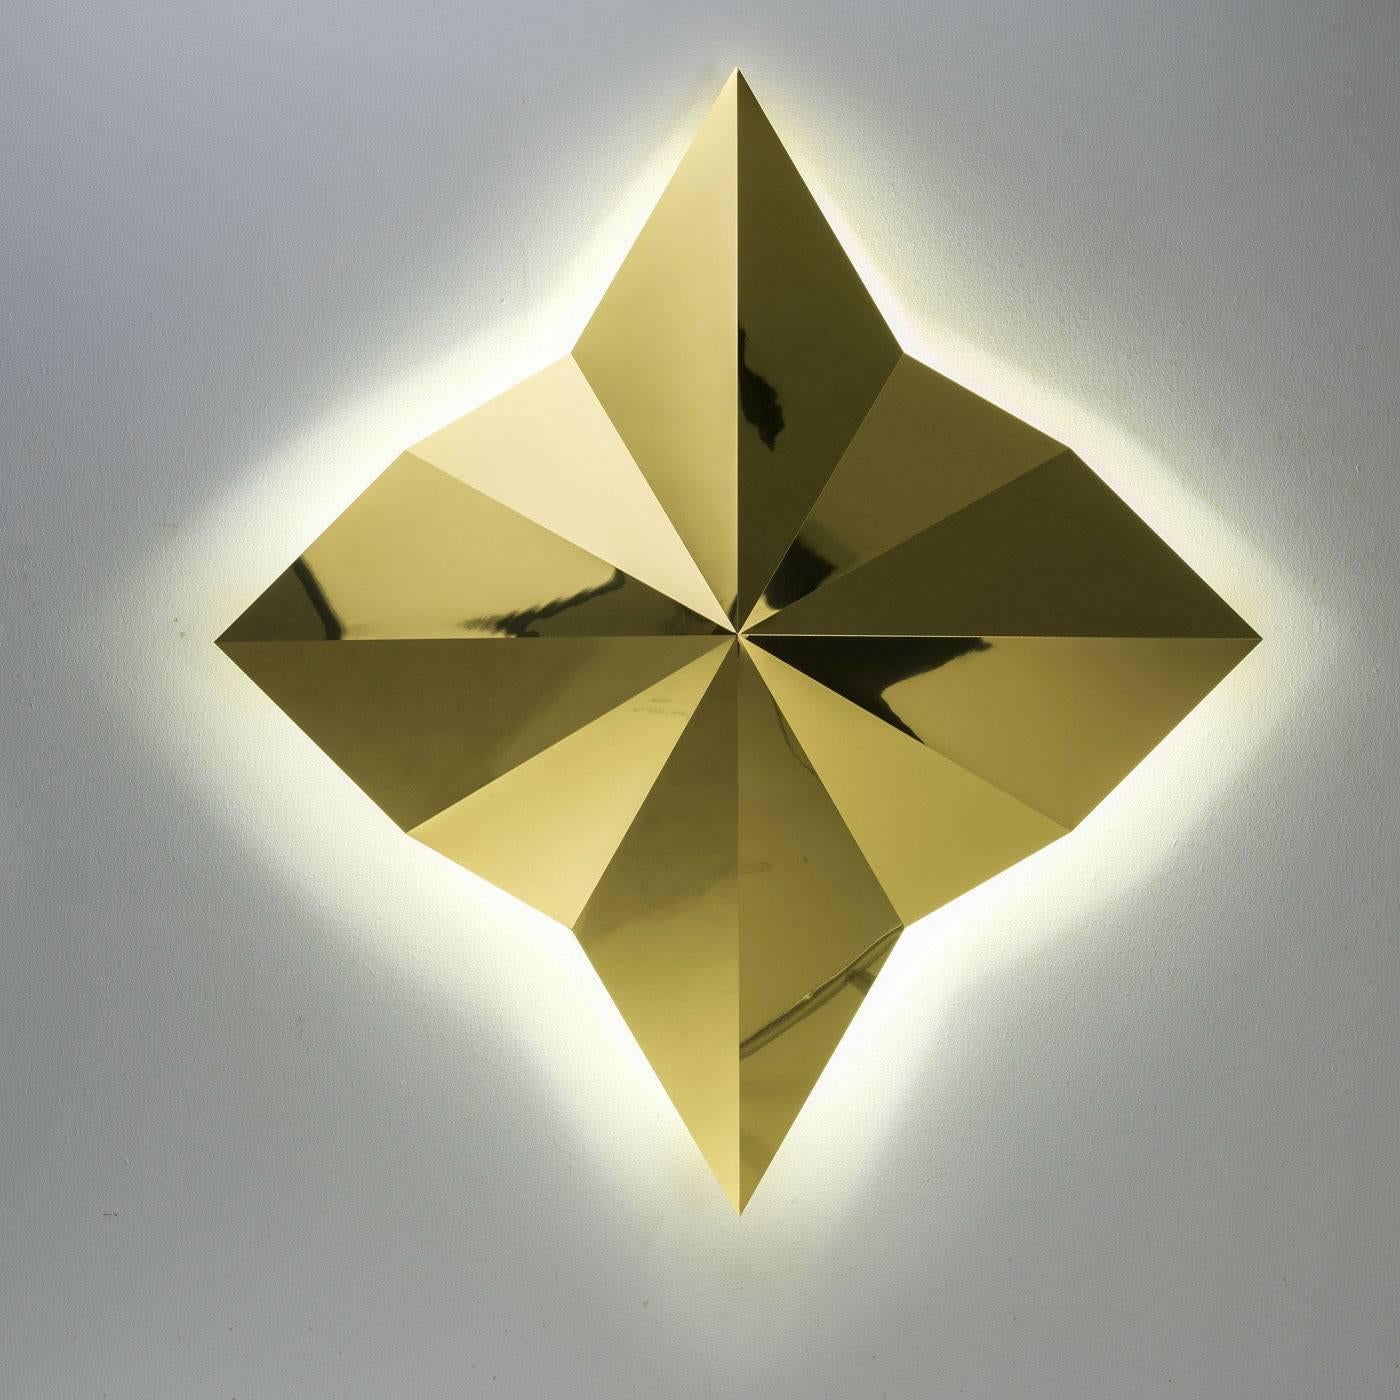 This lamp has a multidimensional diamond shape achieved using a precise technique requiring a CNC milling machine. Sheets of brass are carved, replicating proportions stemming from the sacred study of geometry. Through this process, a state of